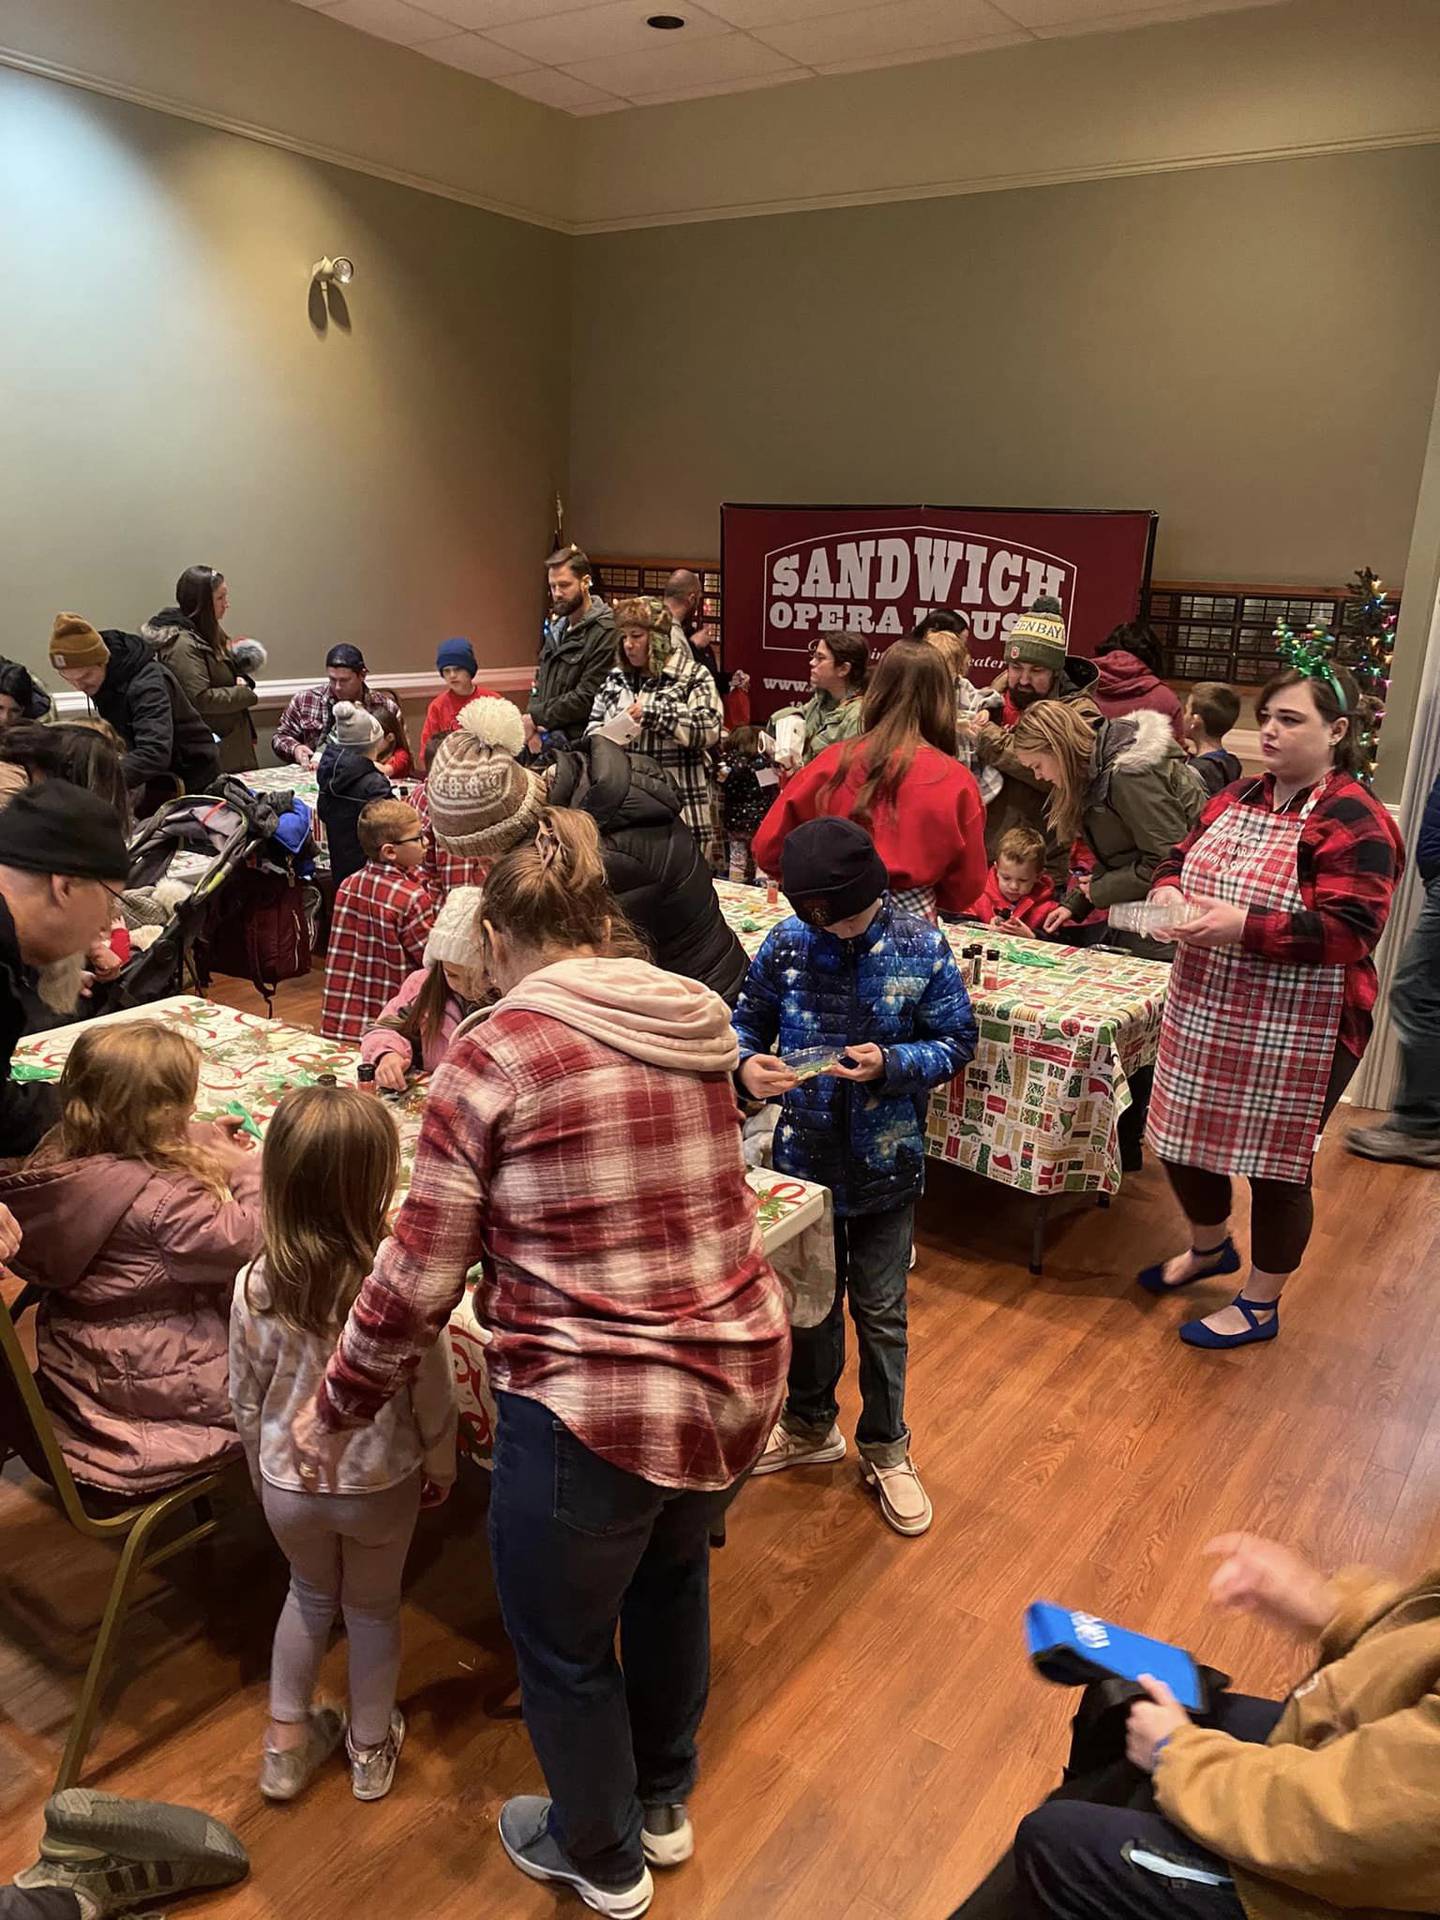 Angie’s Sugar Buzz Bakery in Sandwich oversaw cookie decorating in the community room at the Sandwich Opera House as part of Merry Little Sandwich Christmas on Dec. 2.